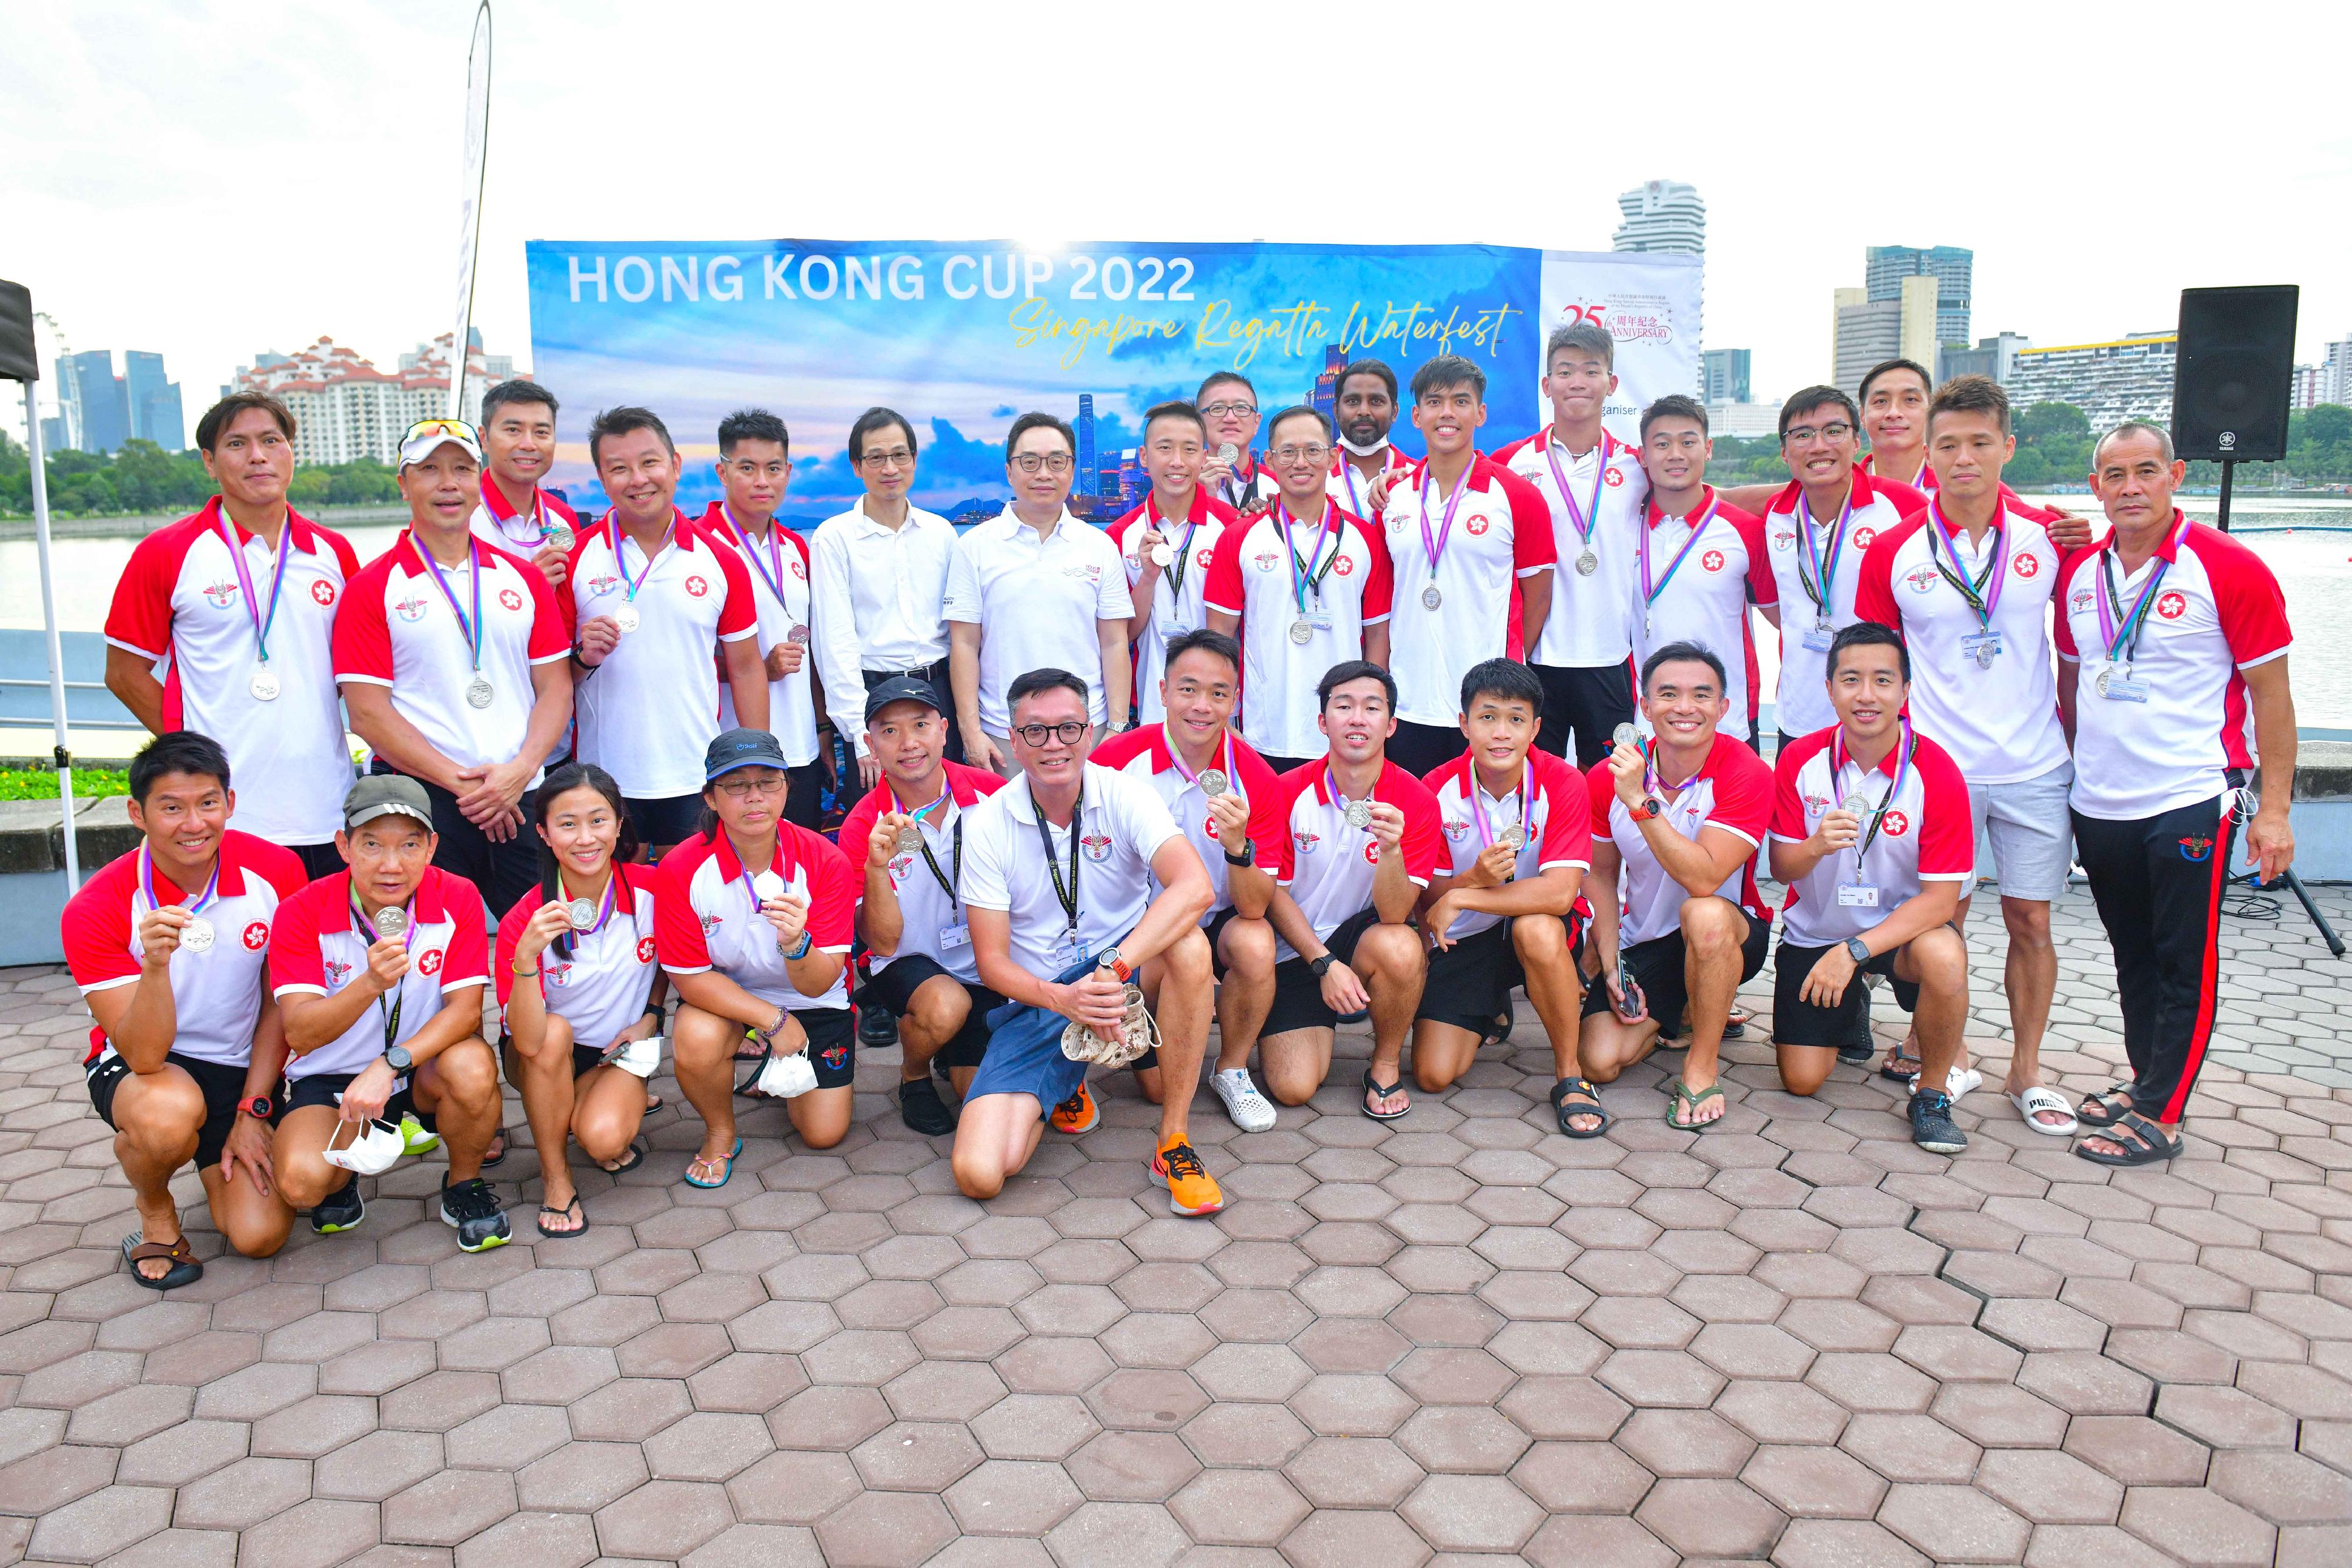 The Hong Kong Economic and Trade Office in Singapore (Singapore ETO) hosted the Hong Kong Cup 2022 dragon boat races during the Singapore Regatta Waterfest yesterday and today (December 3 and 4) to celebrate the 25th anniversary of the establishment of the Hong Kong Special Administrative Region. Photo shows the Director of the Singapore ETO, Mr Owin Fung (second row, seventh left), with the Hong Kong team, which finished second in the Hong Kong Cup Open race.